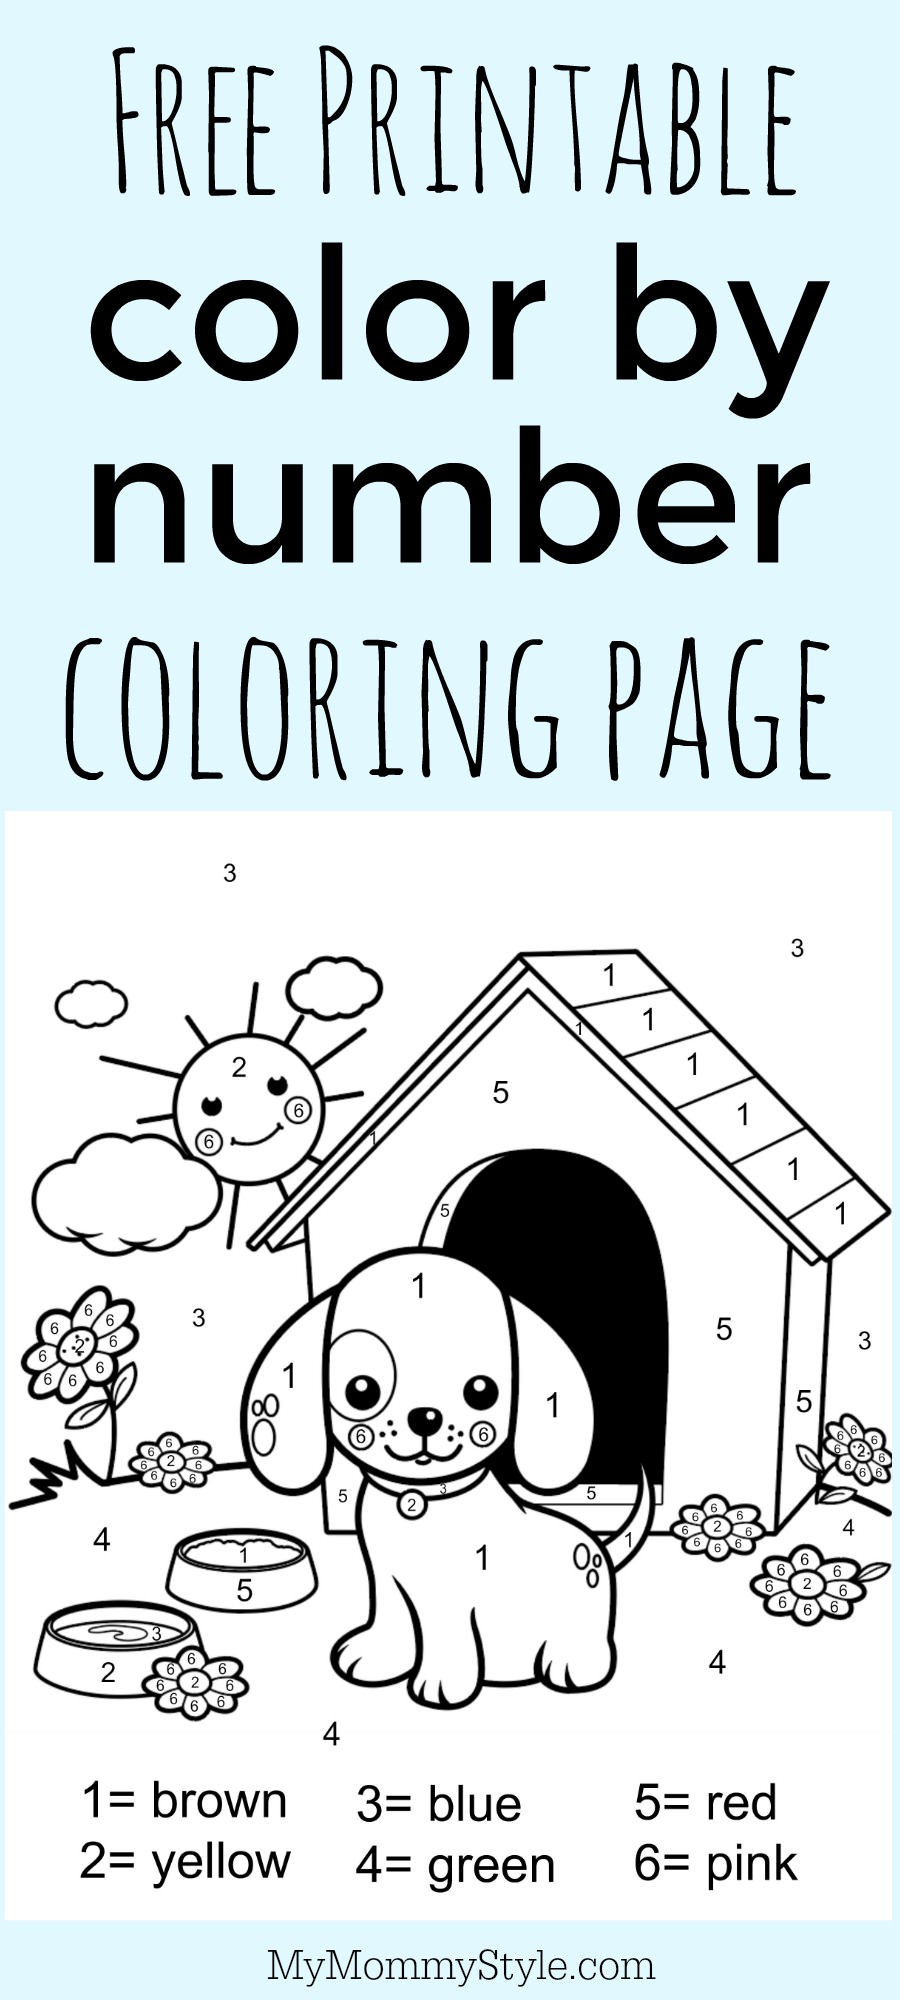 Color by number coloring page free printable - My Mommy Style